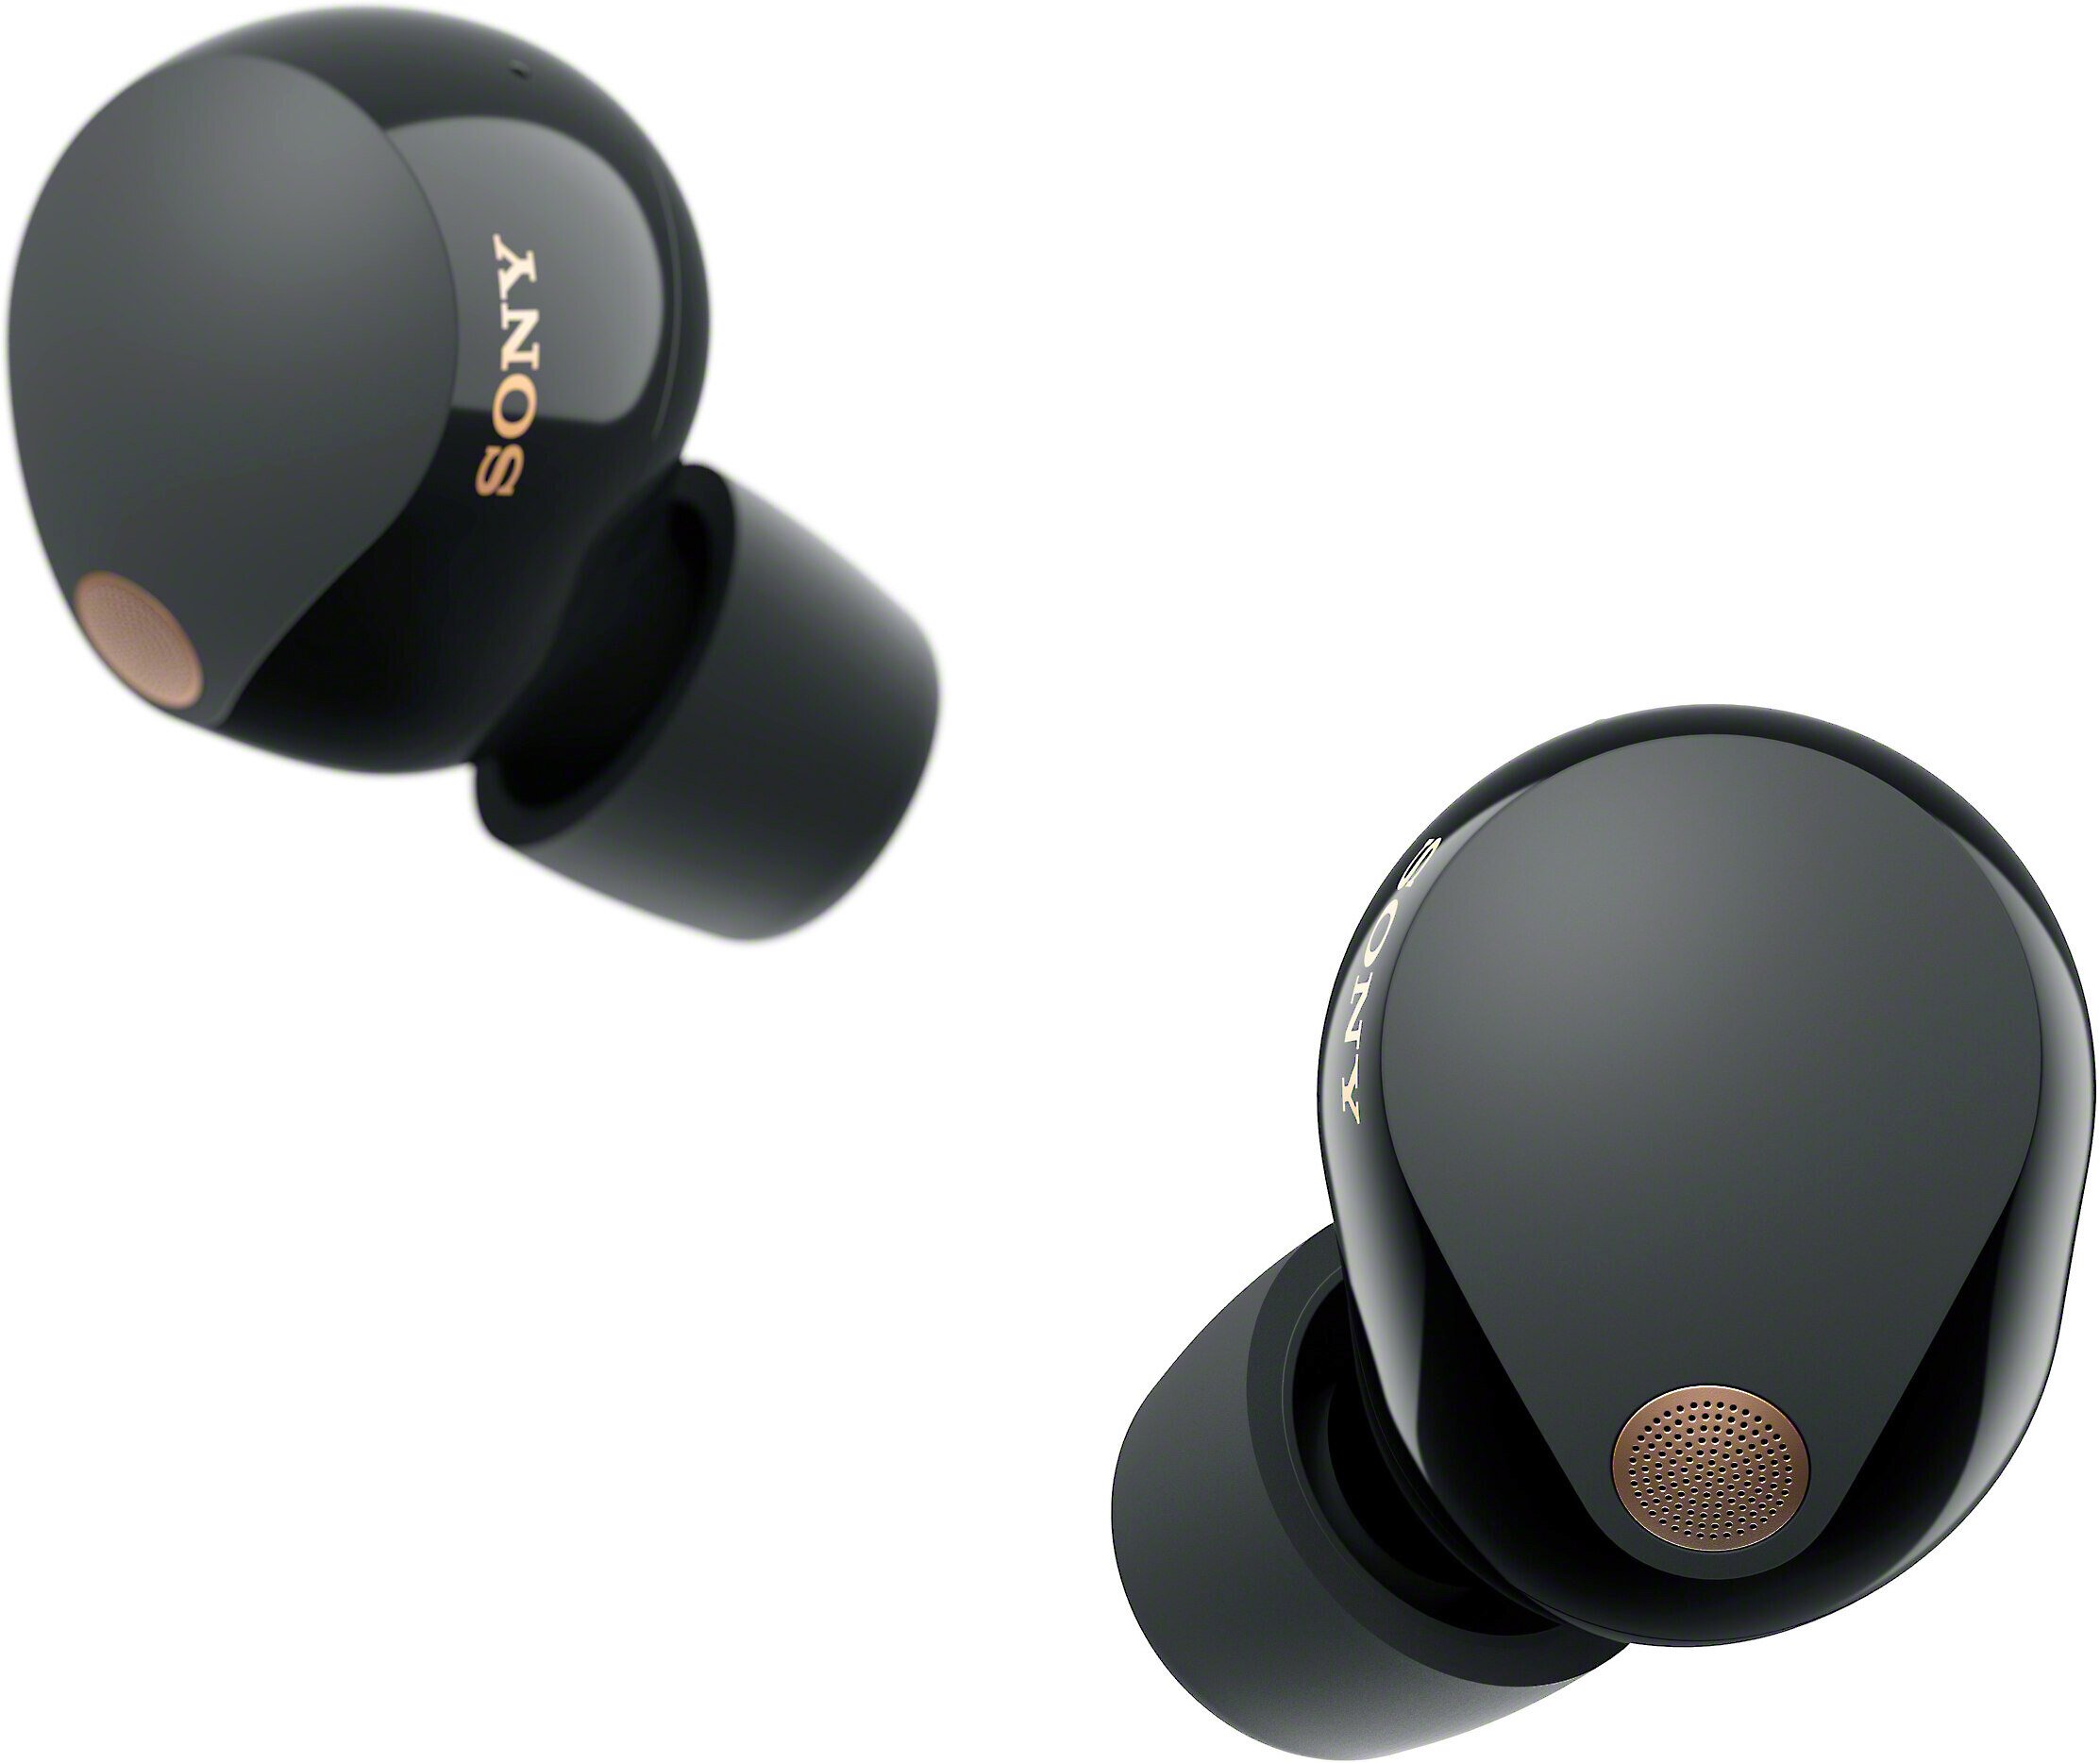 Sony XM4 ANC headphones and true wireless earbuds hit new lows